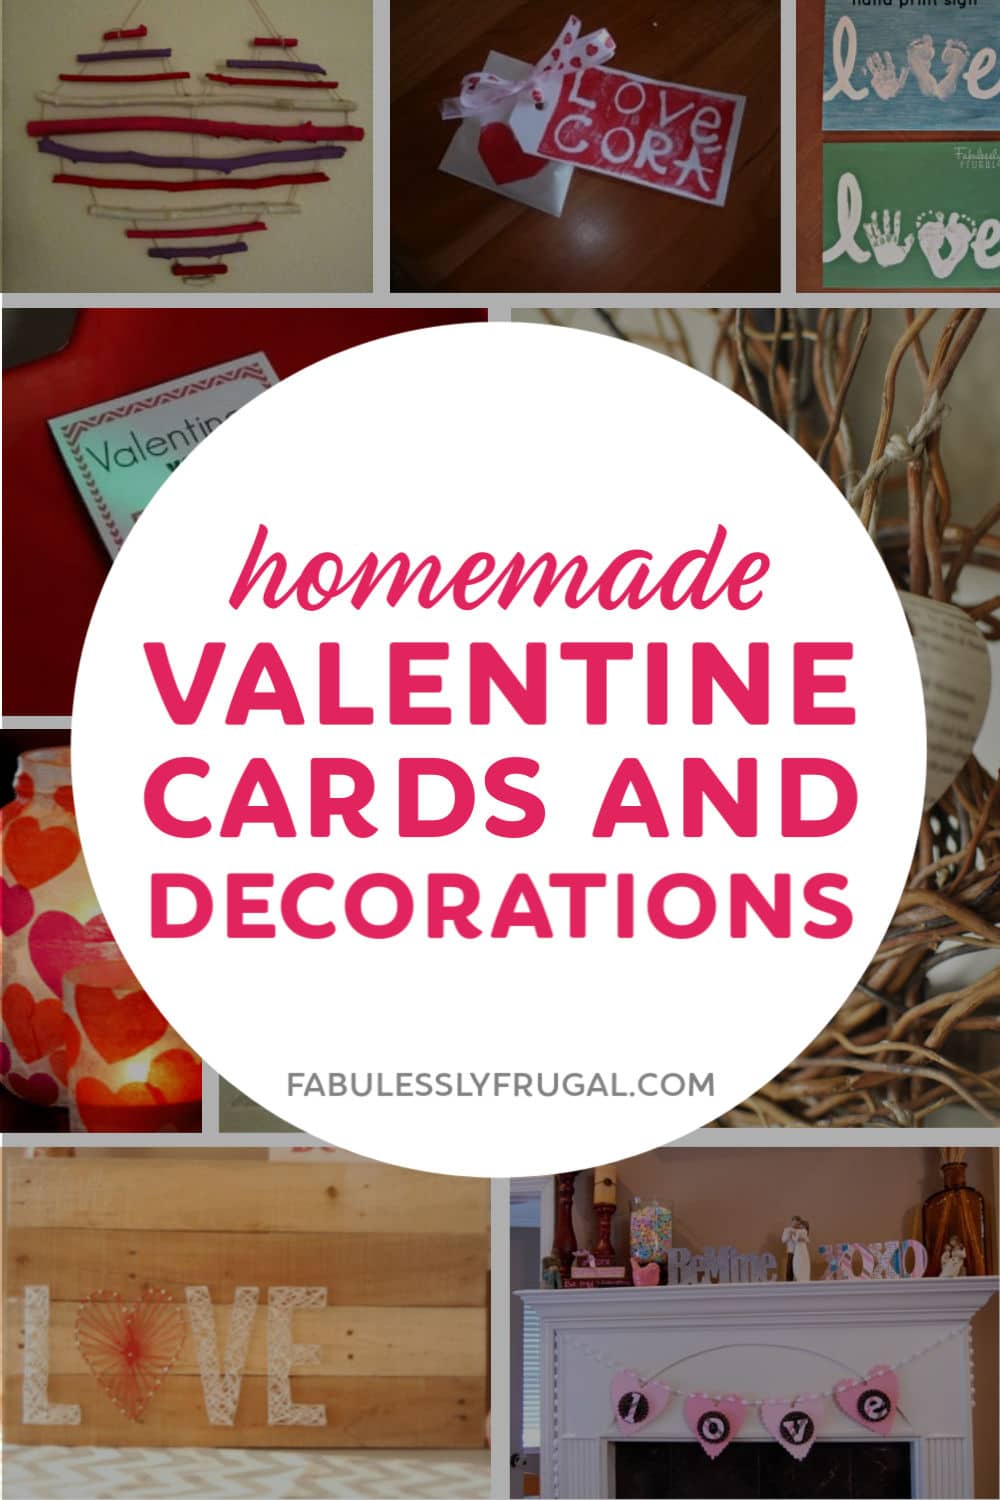 Homemade valentine cards and decorations